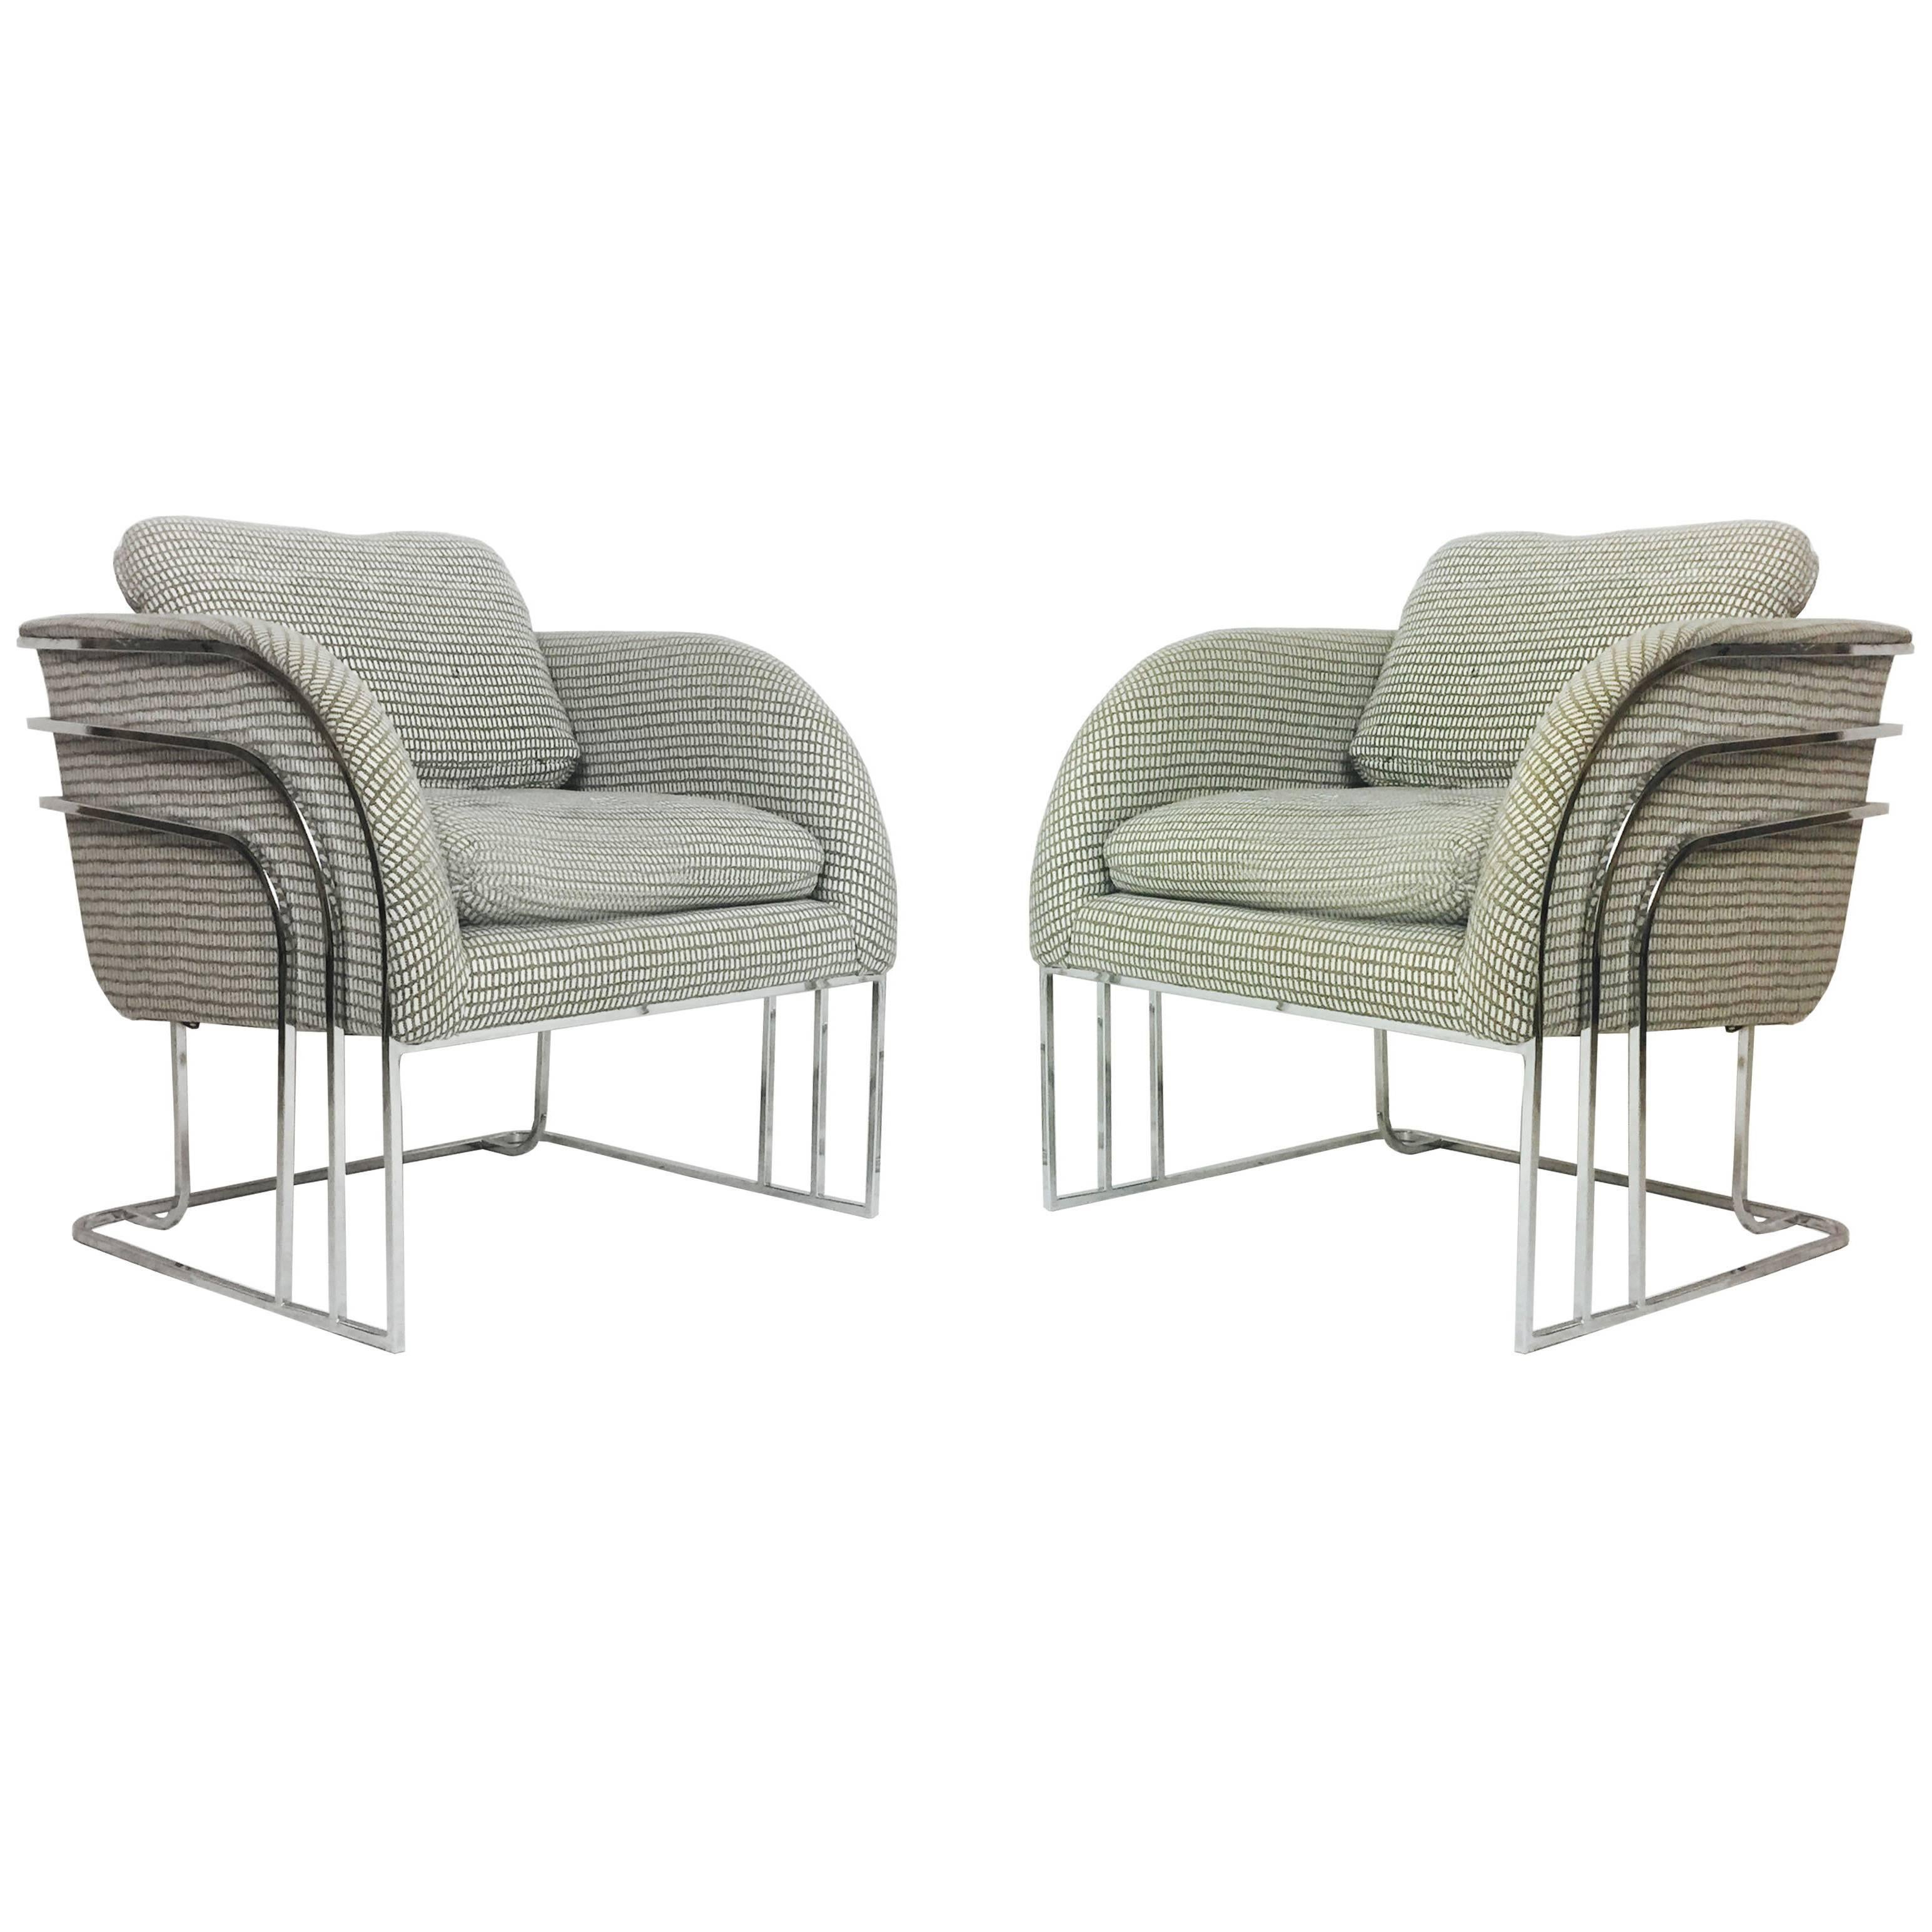 Pair of Deco Style Chrome Chairs by Milo Baughman